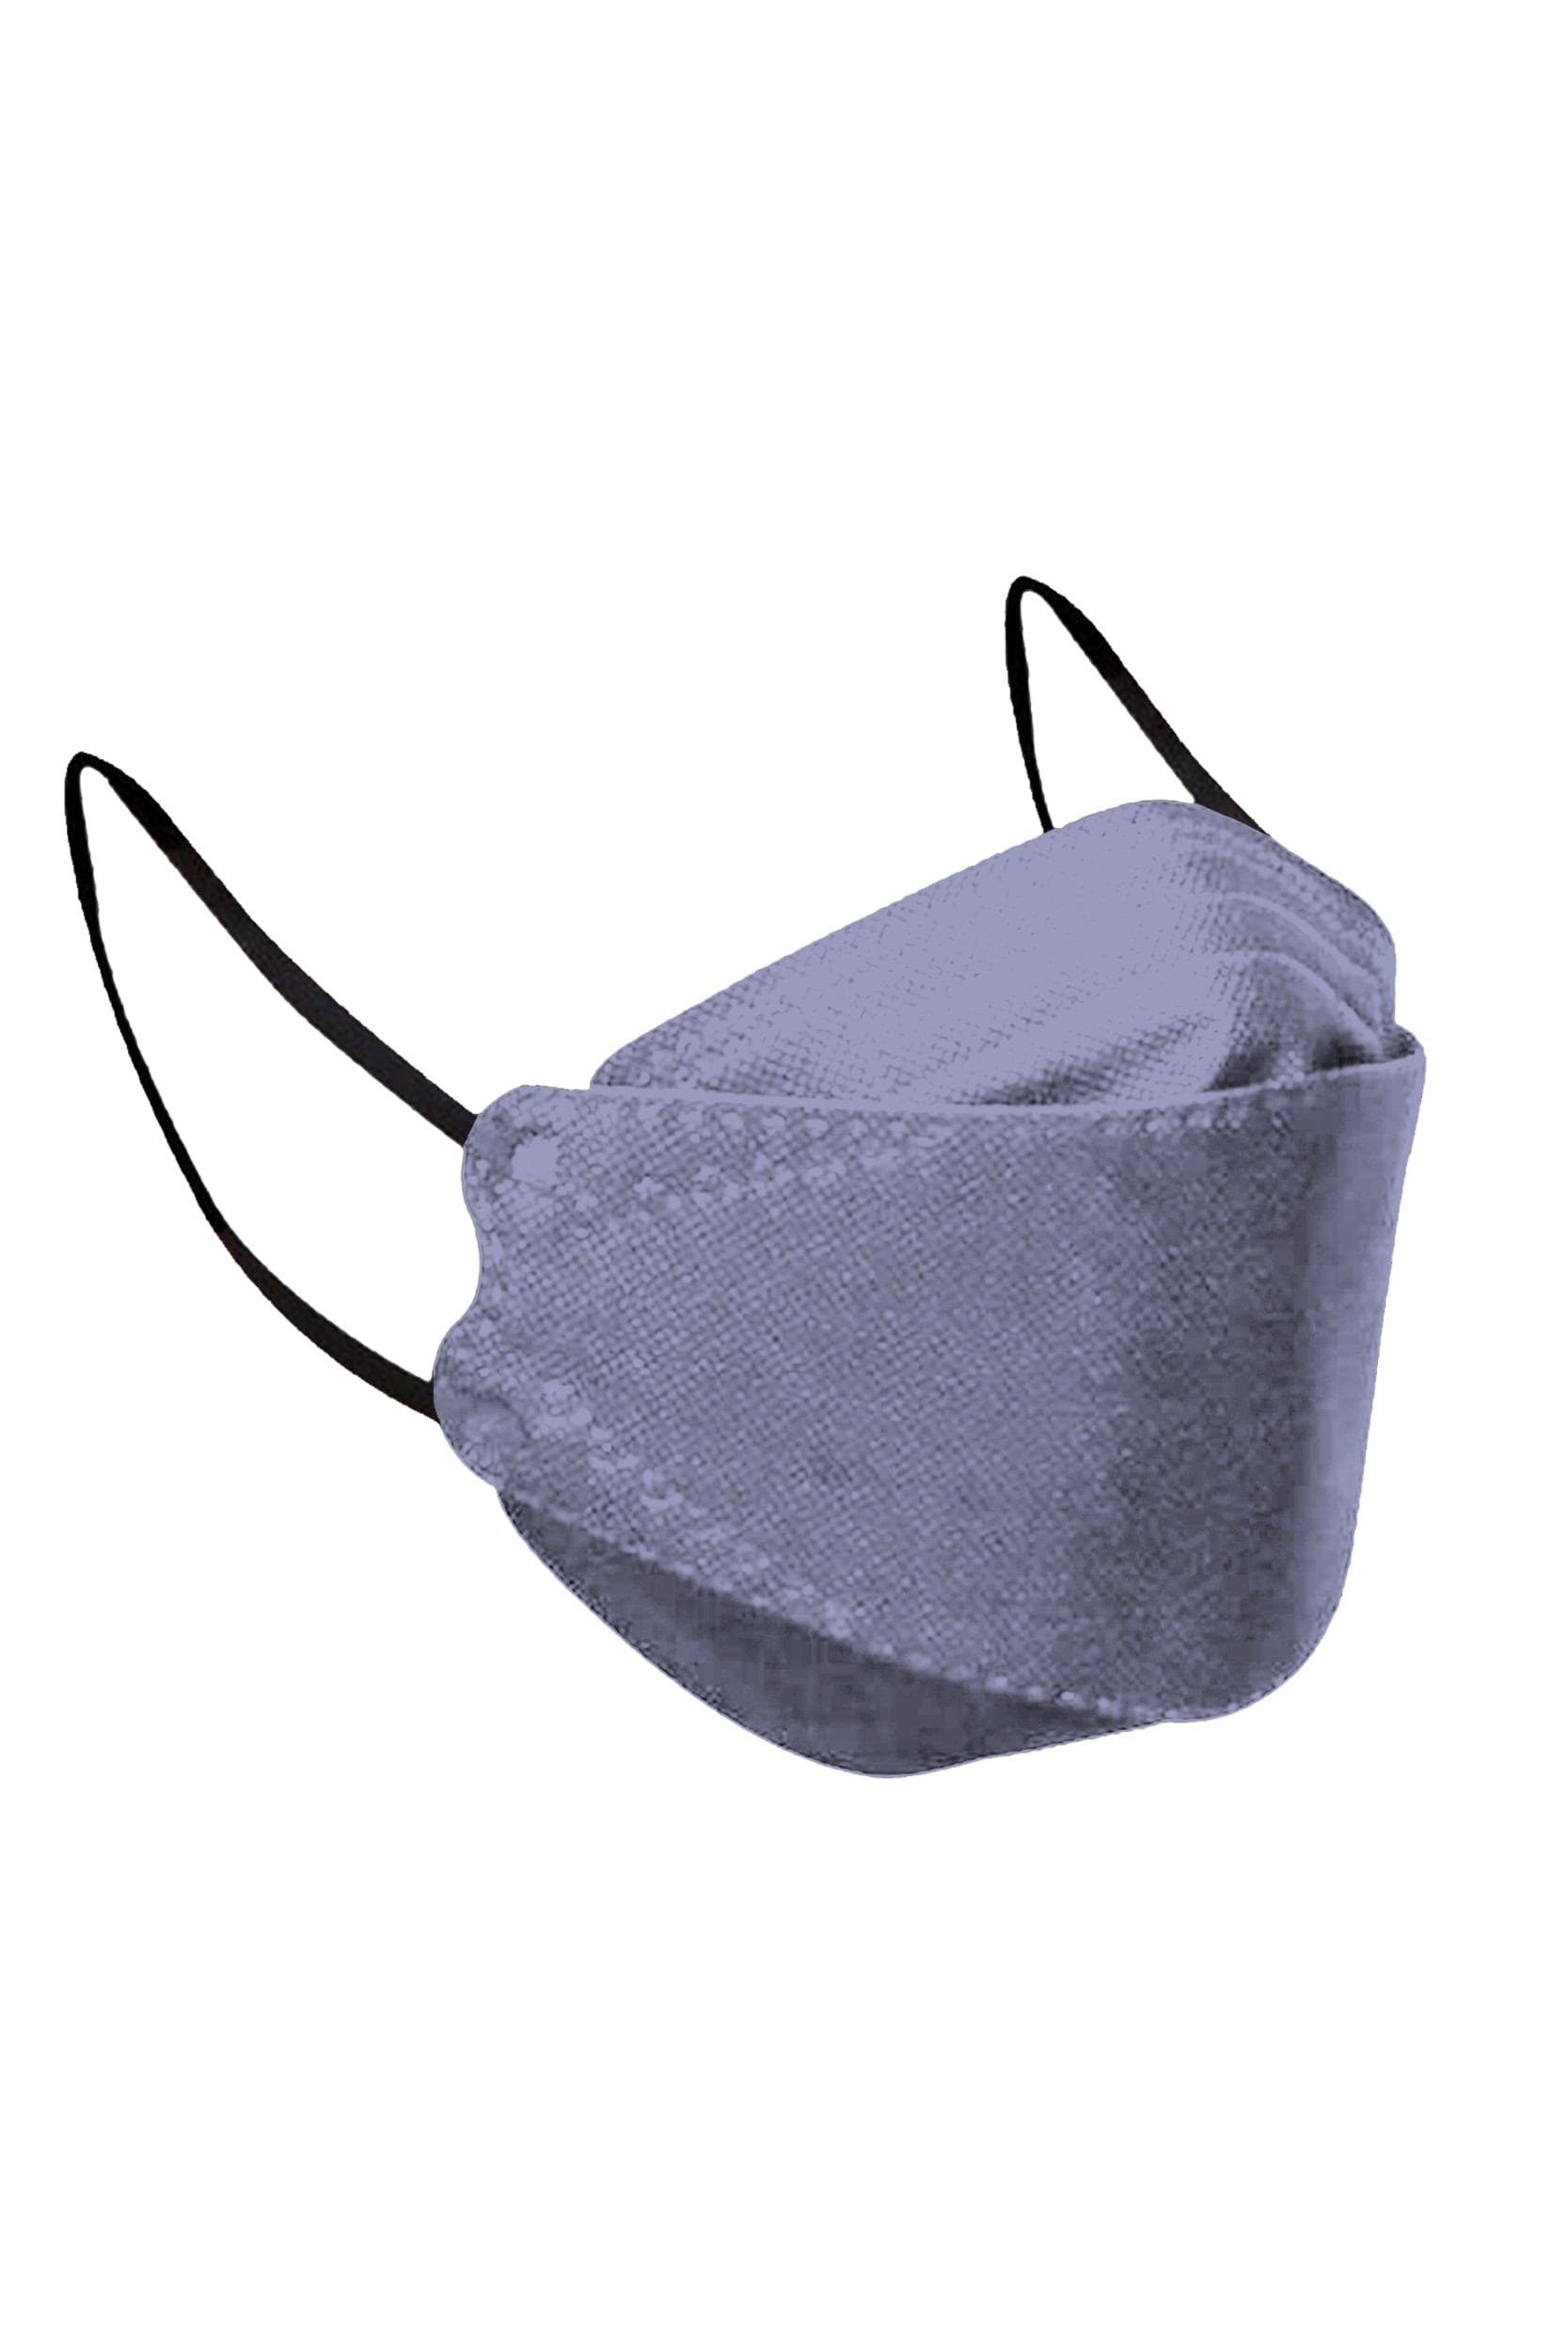 Stylish light purple KF94 face mask, with soft black ear loops and high quality fabric. 